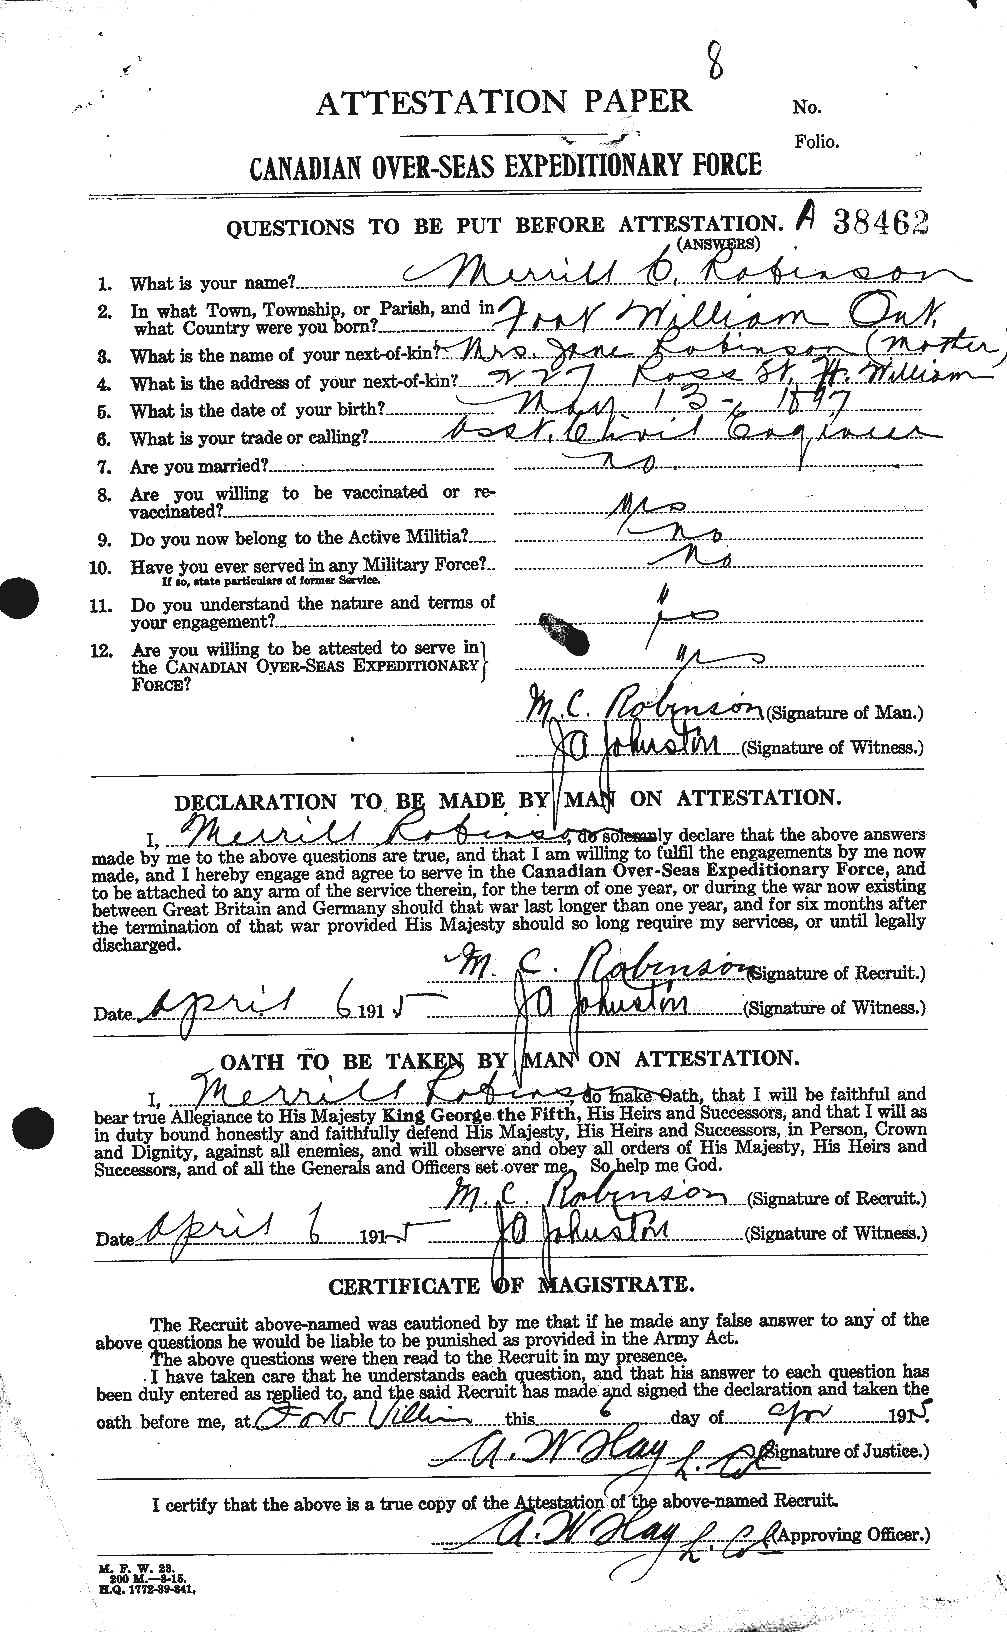 Personnel Records of the First World War - CEF 611676a